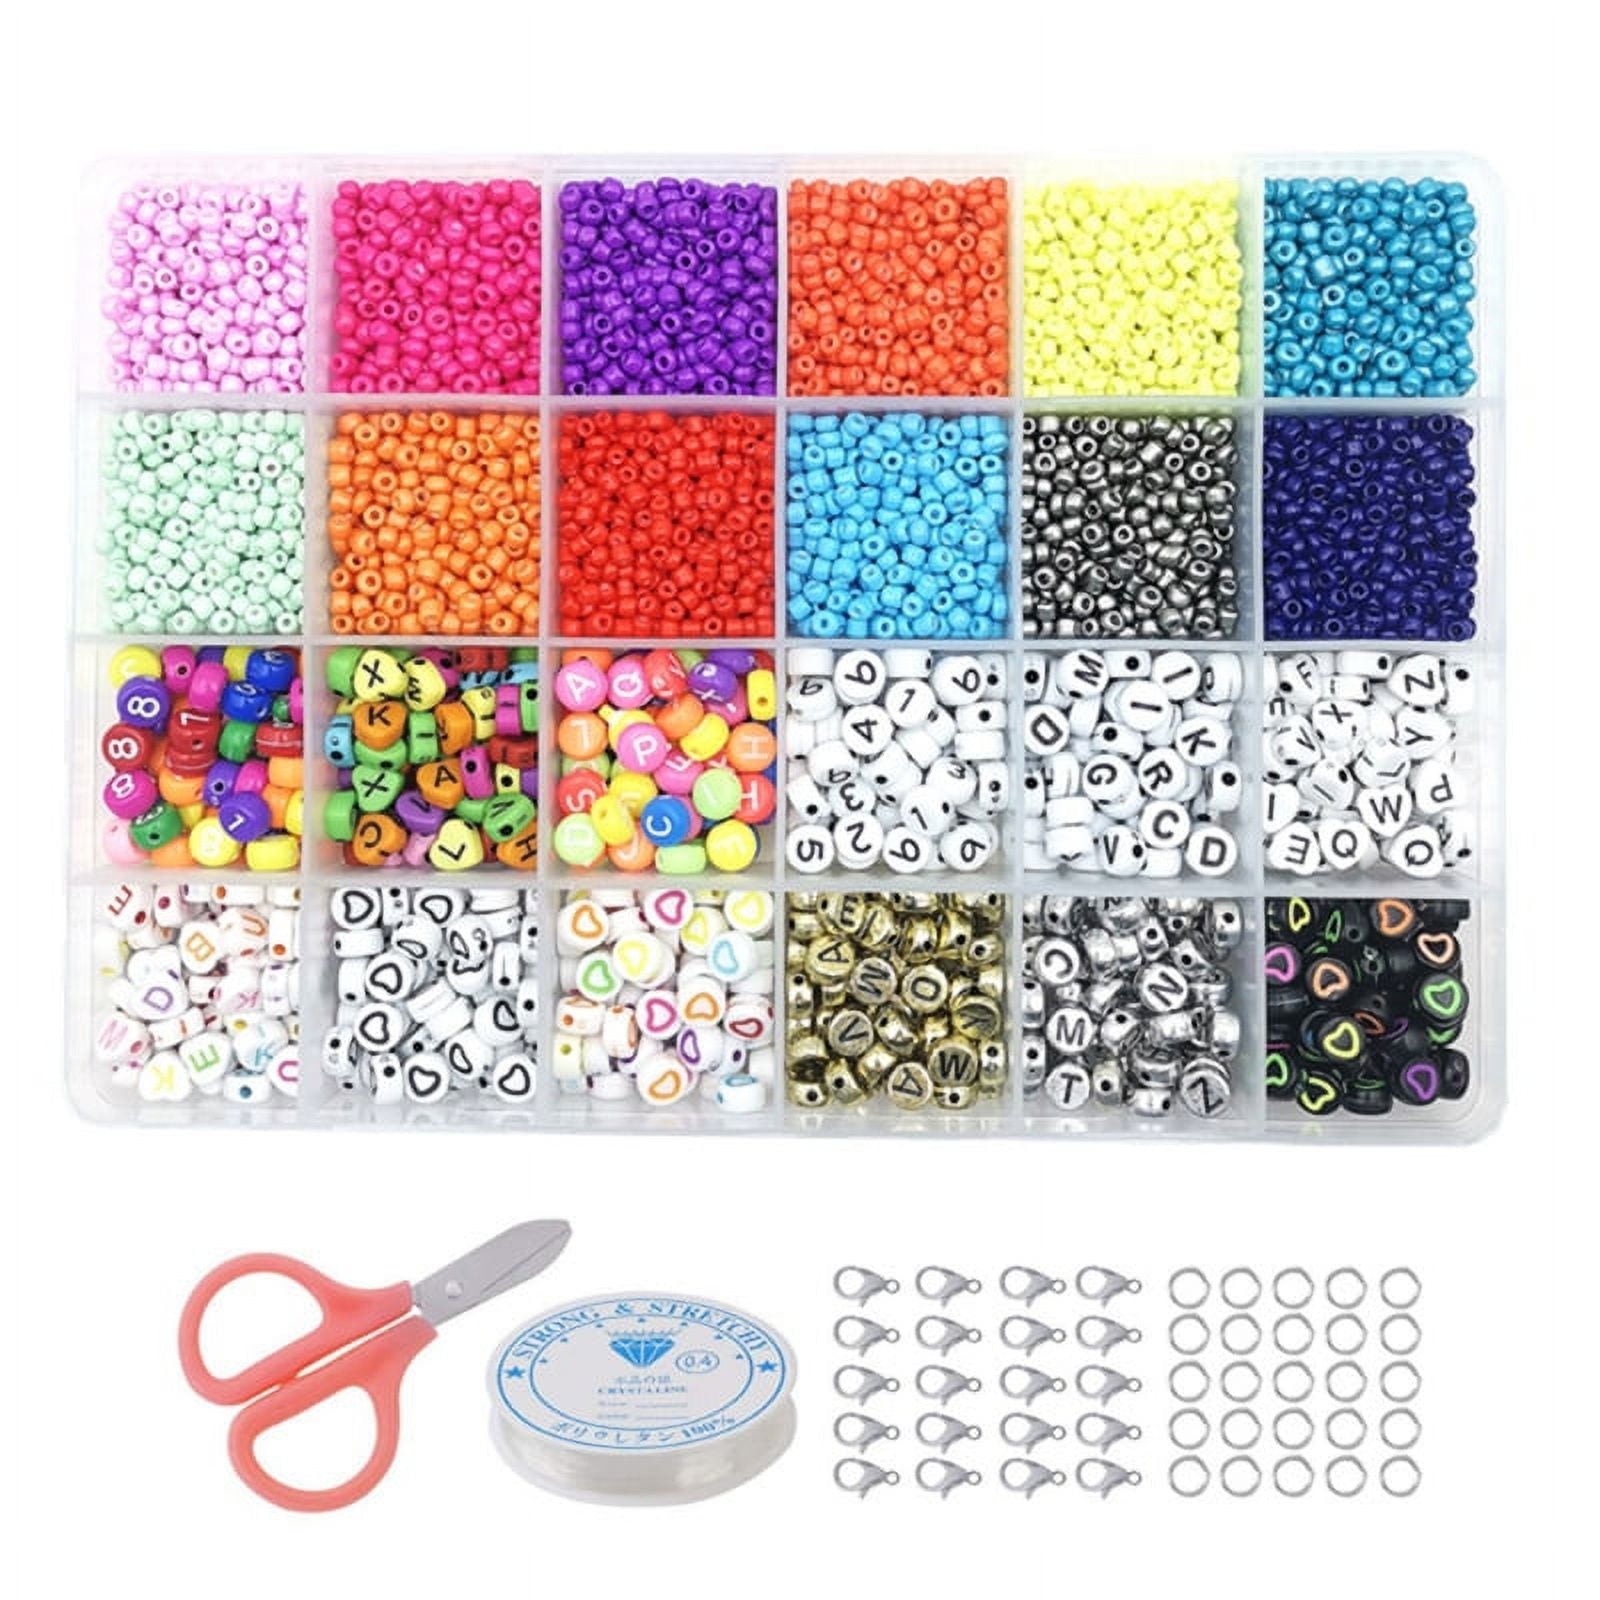 8,000pc DIY Fuse Bead Kit w Carrying Case - Bugs and Insects - 21 Colors,  12 Unique Templates, 4 Peg Boards, Tweezers, Ironing Paper - Works w Perler